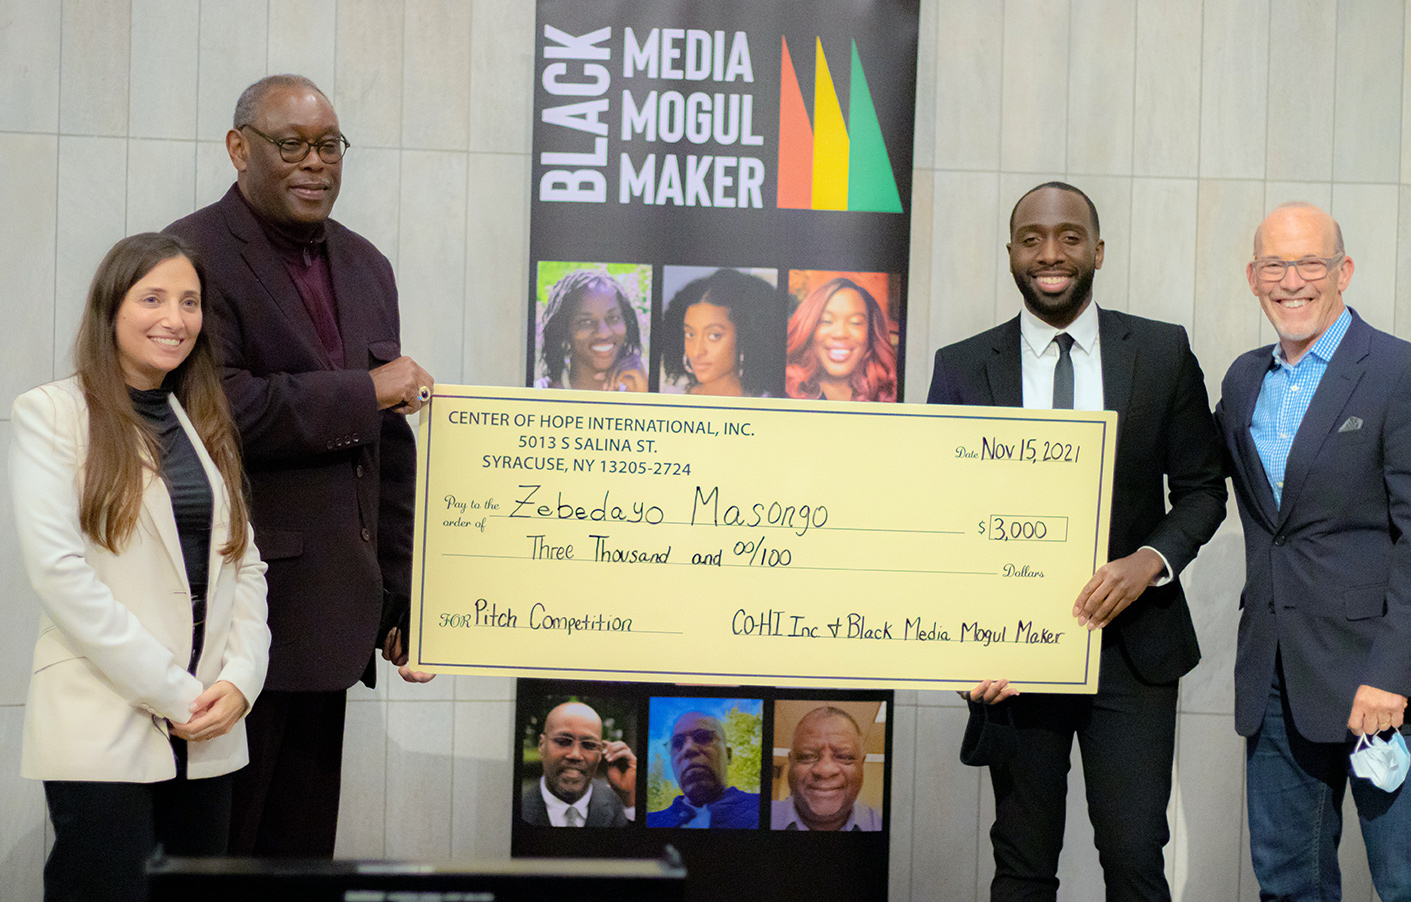 Zebedayo Masongo (second from right) was the winner of the Black Media Mogul Maker pitch competition.